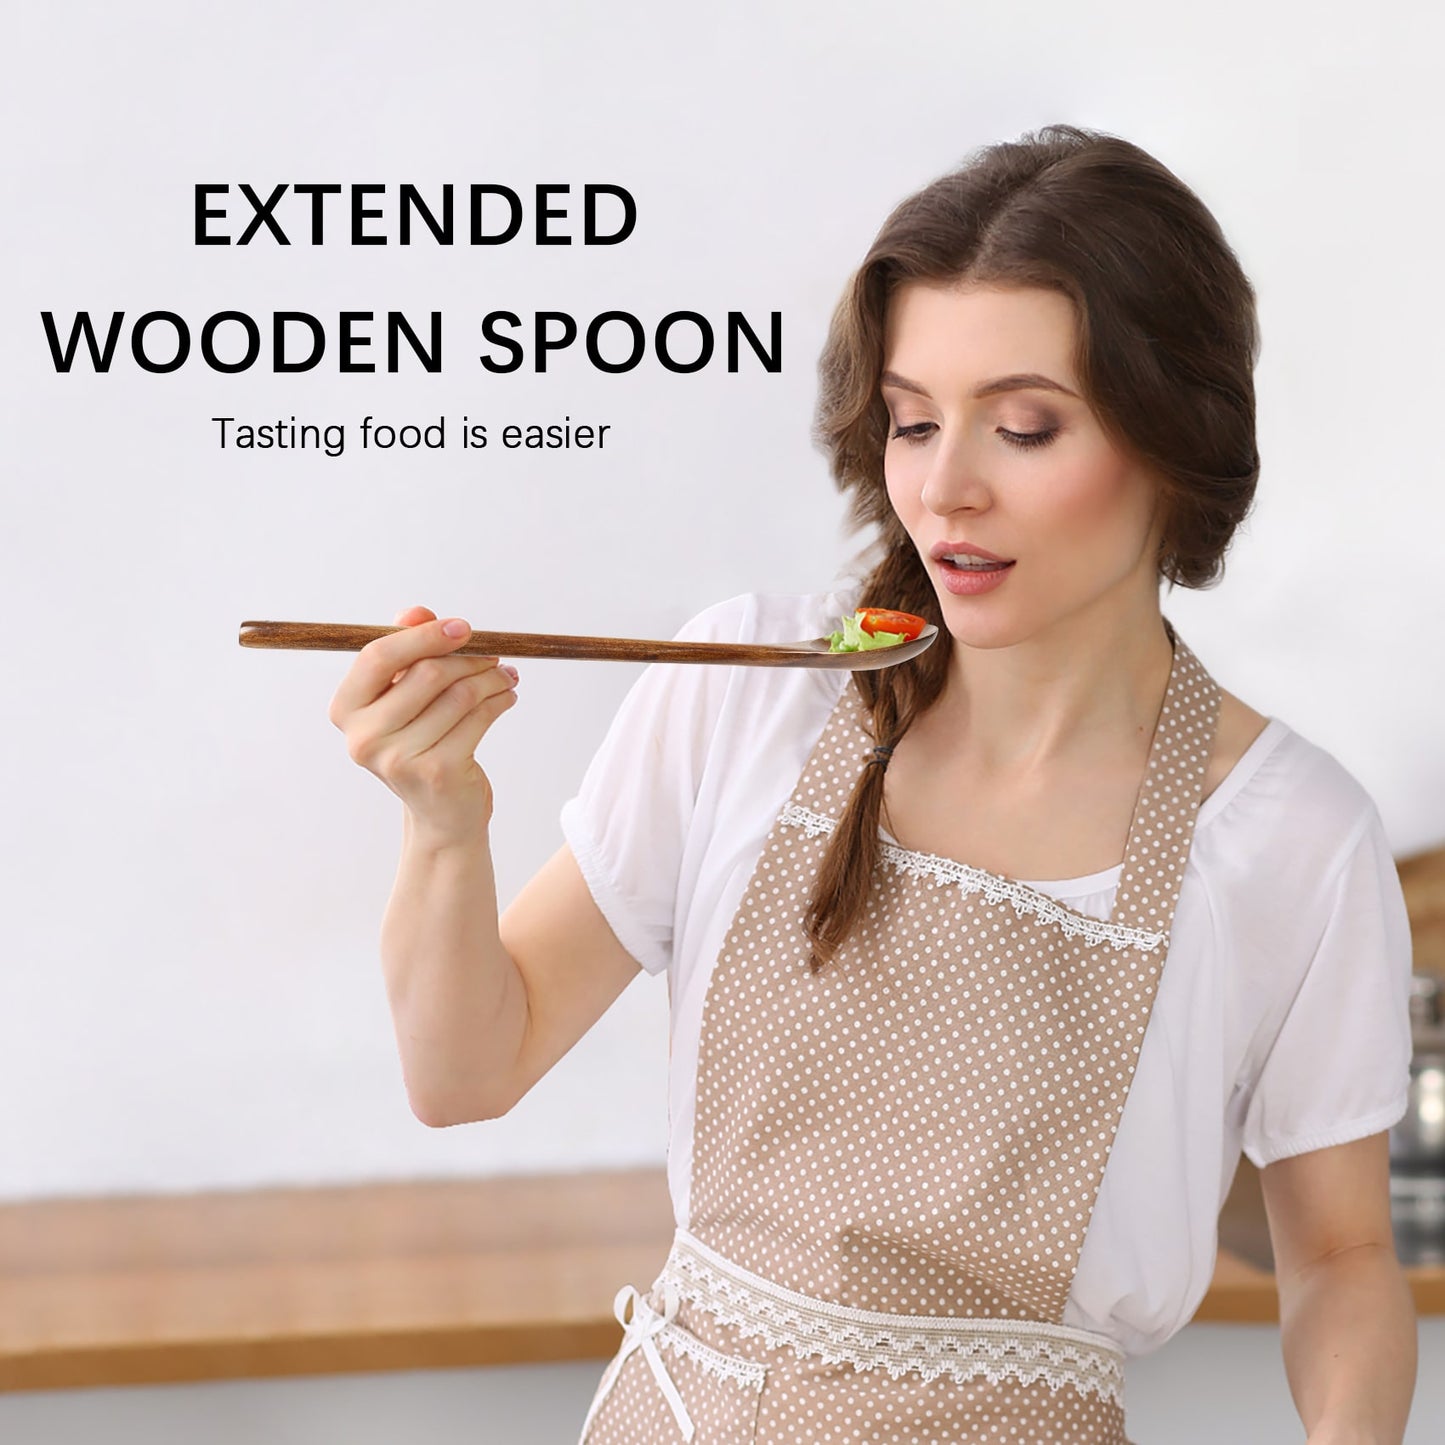 A woman was about to sample food, and with this long-handled wooden spoon made of natural wood, the